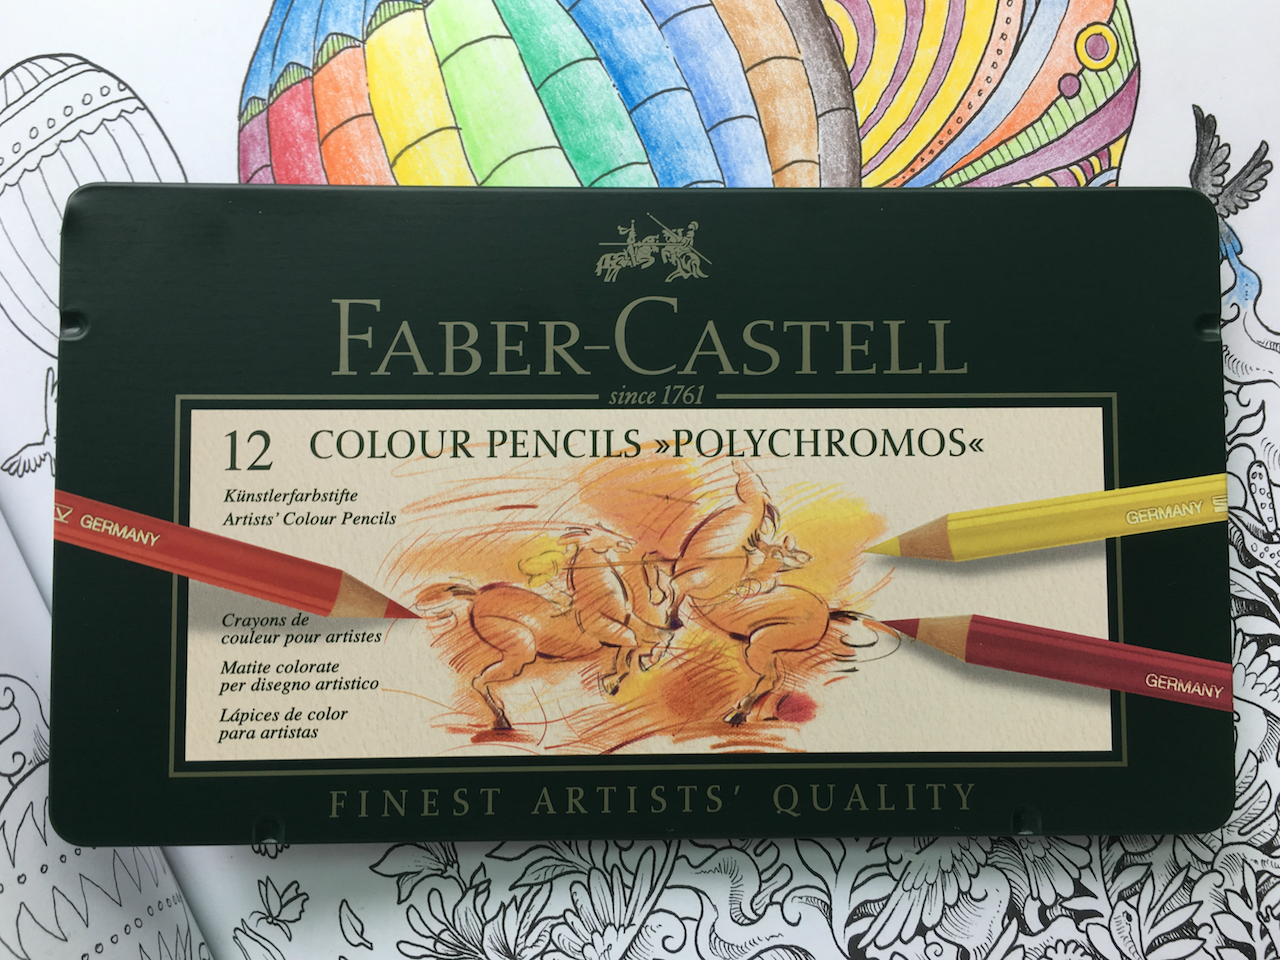 How to Pick the Right Colored Pencils - The Well-Appointed Desk